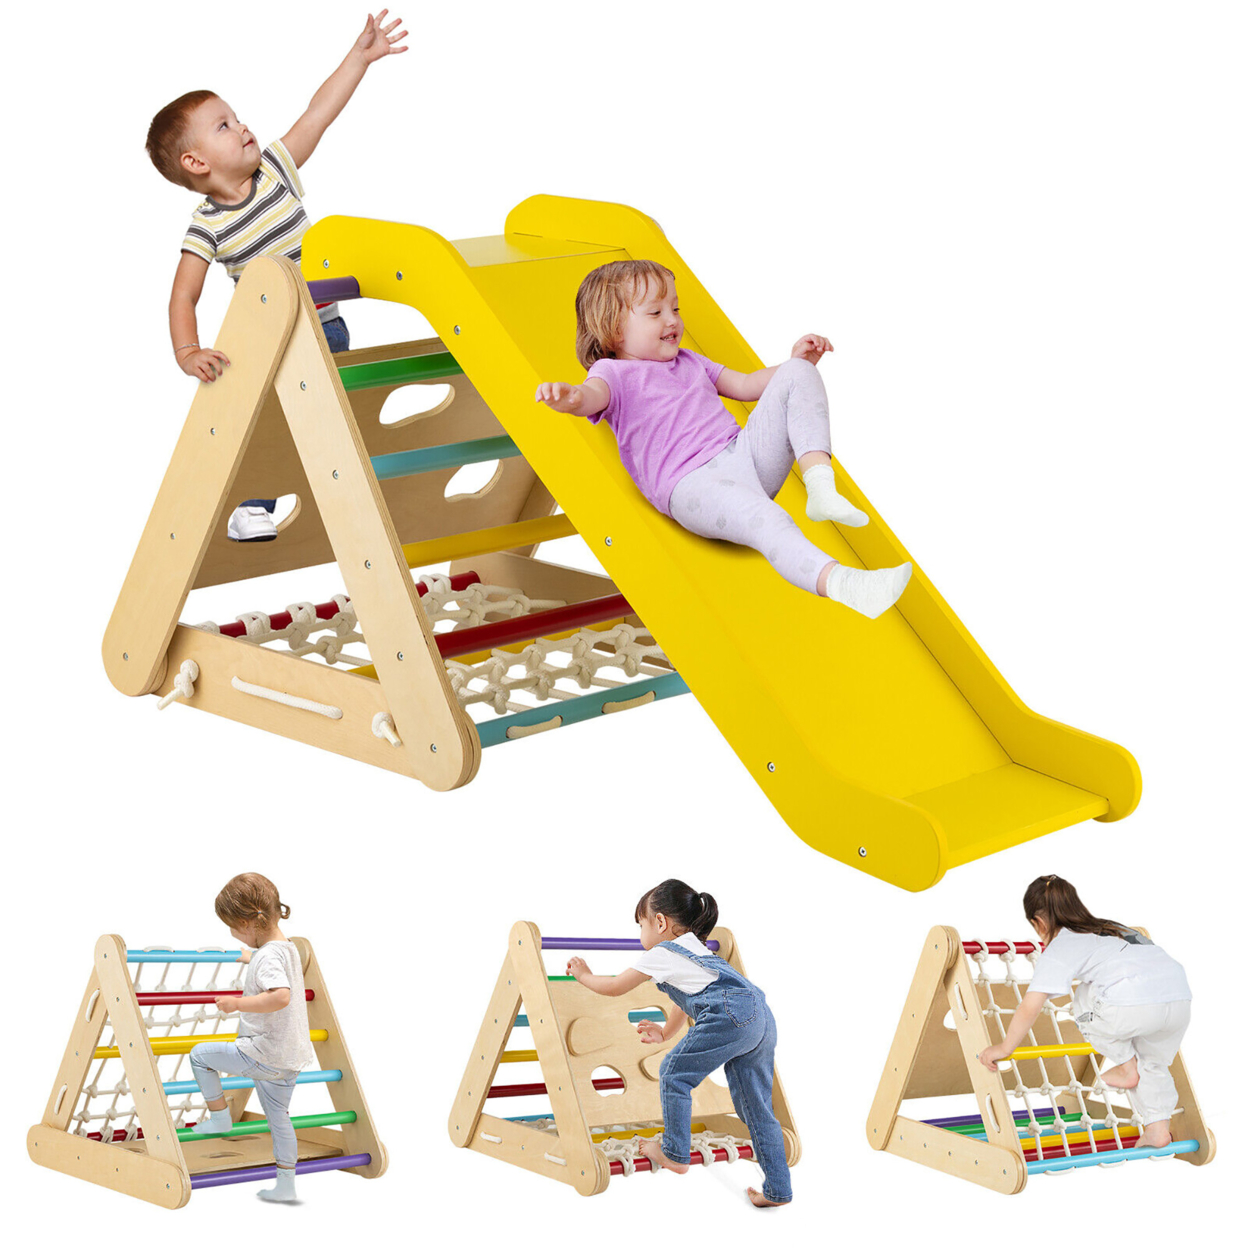 4 In 1 Wooden Climbing Triangle Set Triangle Climber W/ Ramp - Multi-color